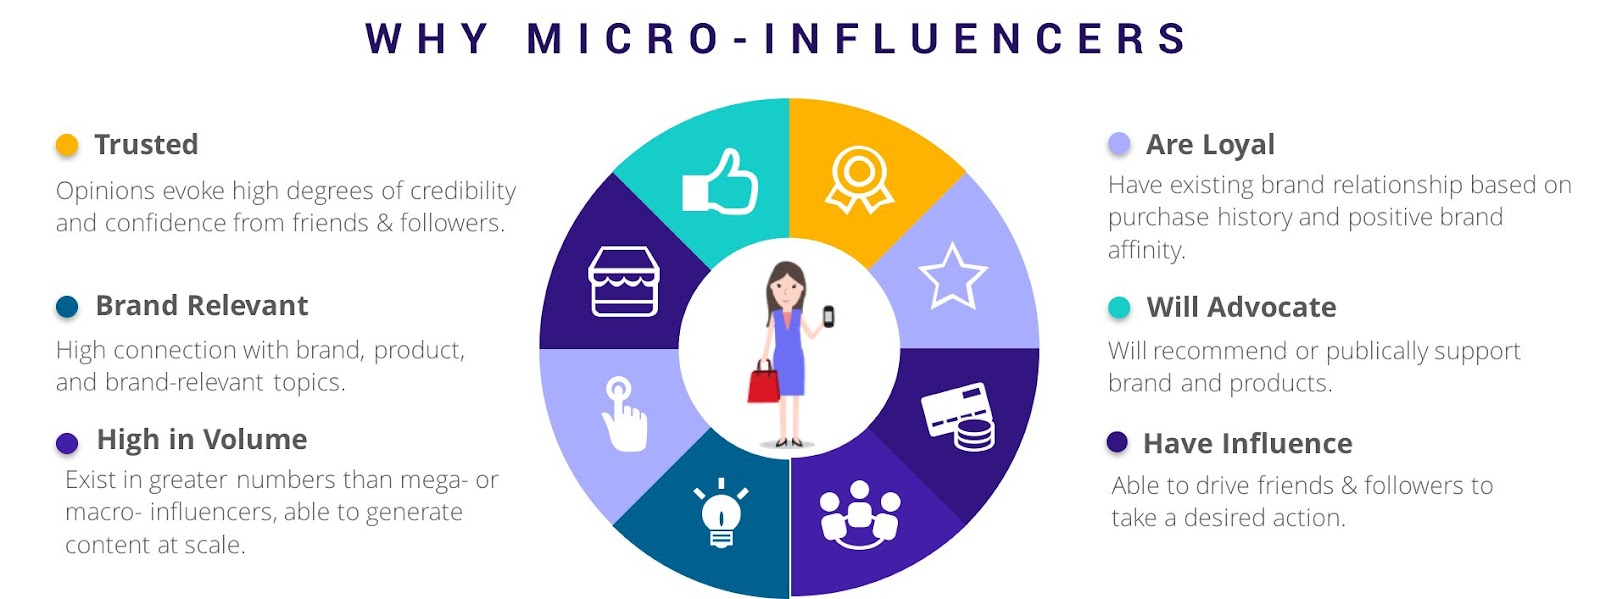 A screenshot of a green, yellow, and purple circle graph depicting the reasons to work with micro-influencers: they are trusted, brand relevant, high in volume, loyal, will advocate, and have influence.